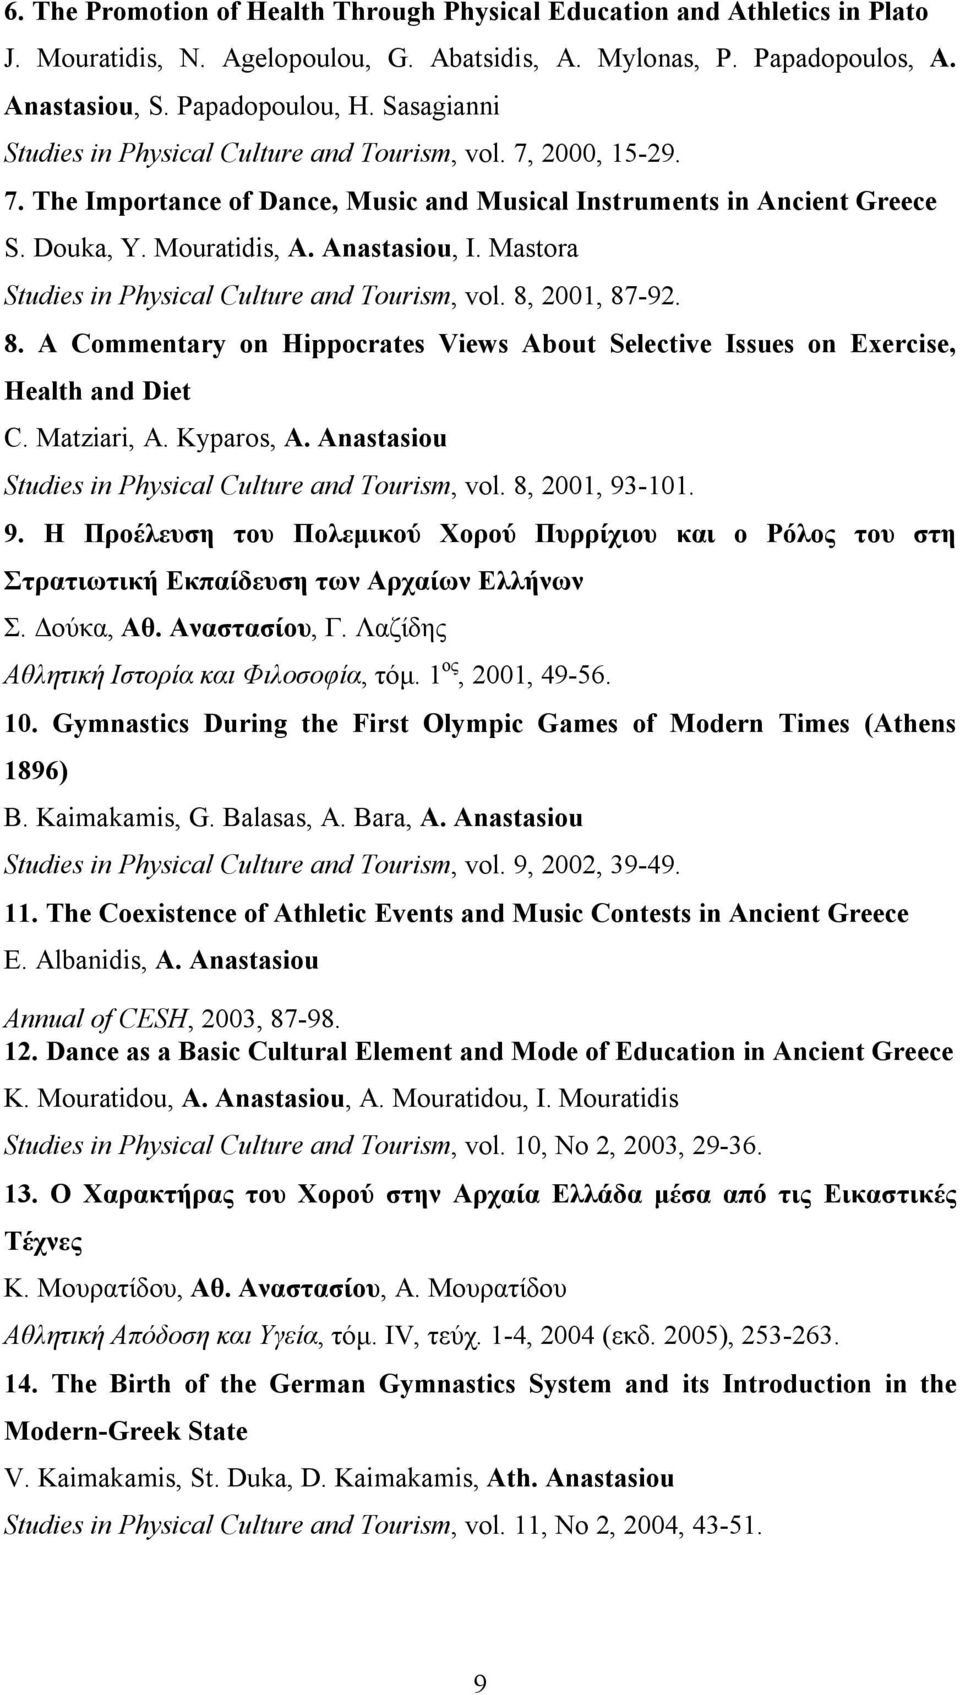 Mastora Studies in Physical Culture and Tourism, vol. 8, 2001, 87-92. 8. A Commentary on Hippocrates Views About Selective Issues on Exercise, Health and Diet C. Matziari, A. Kyparos, A.